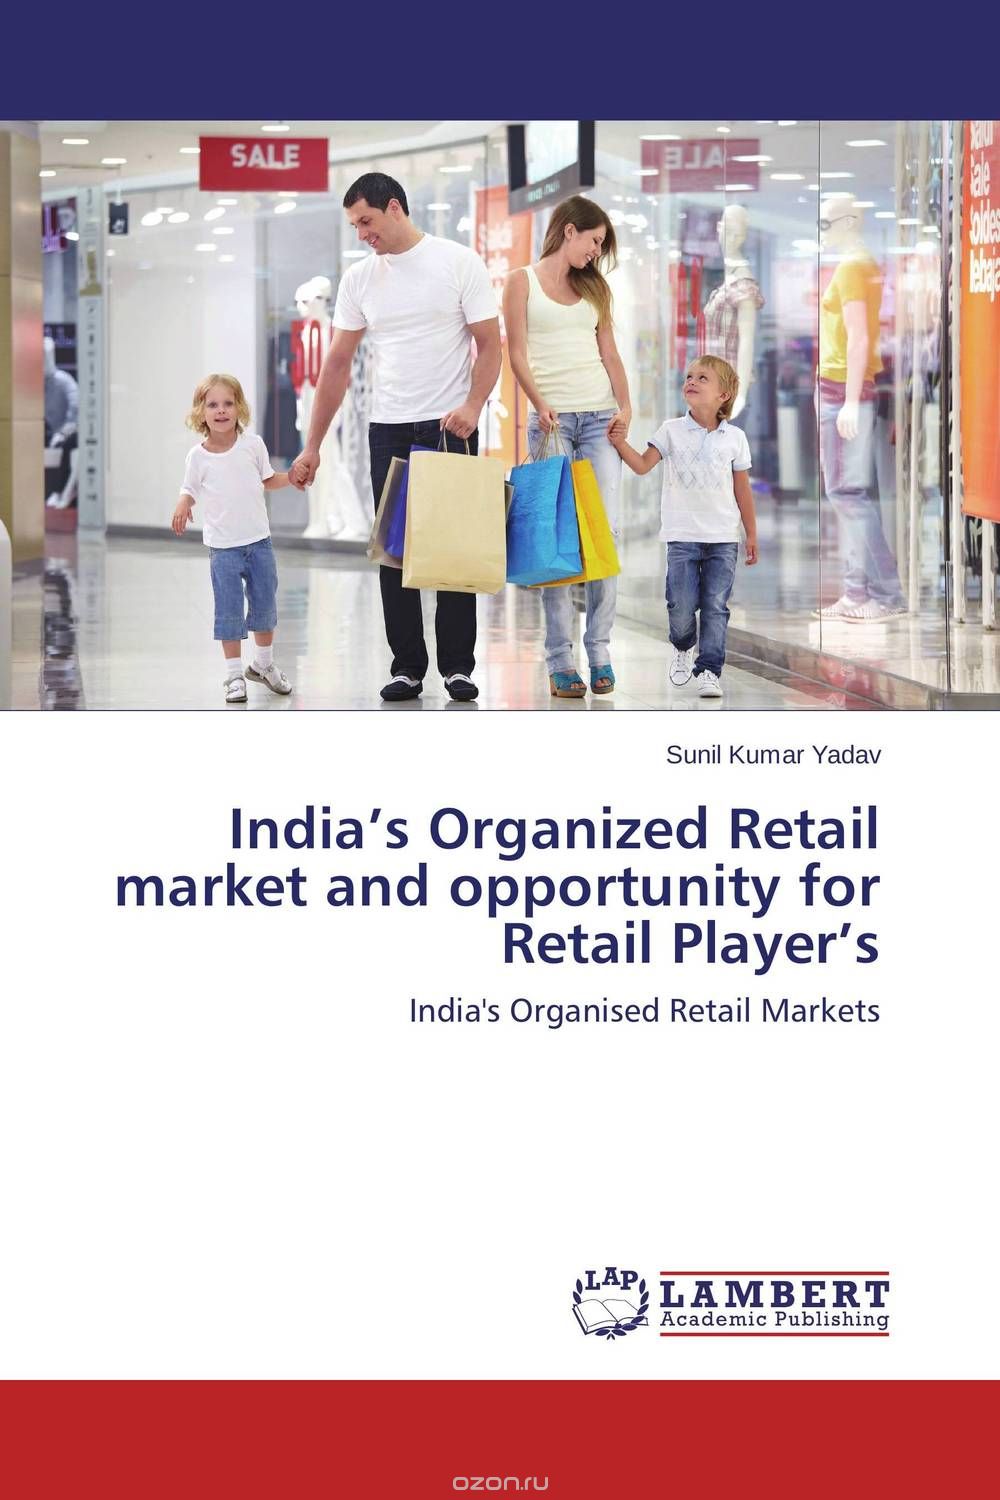 Скачать книгу "India’s Organized Retail market and opportunity for Retail Player’s"